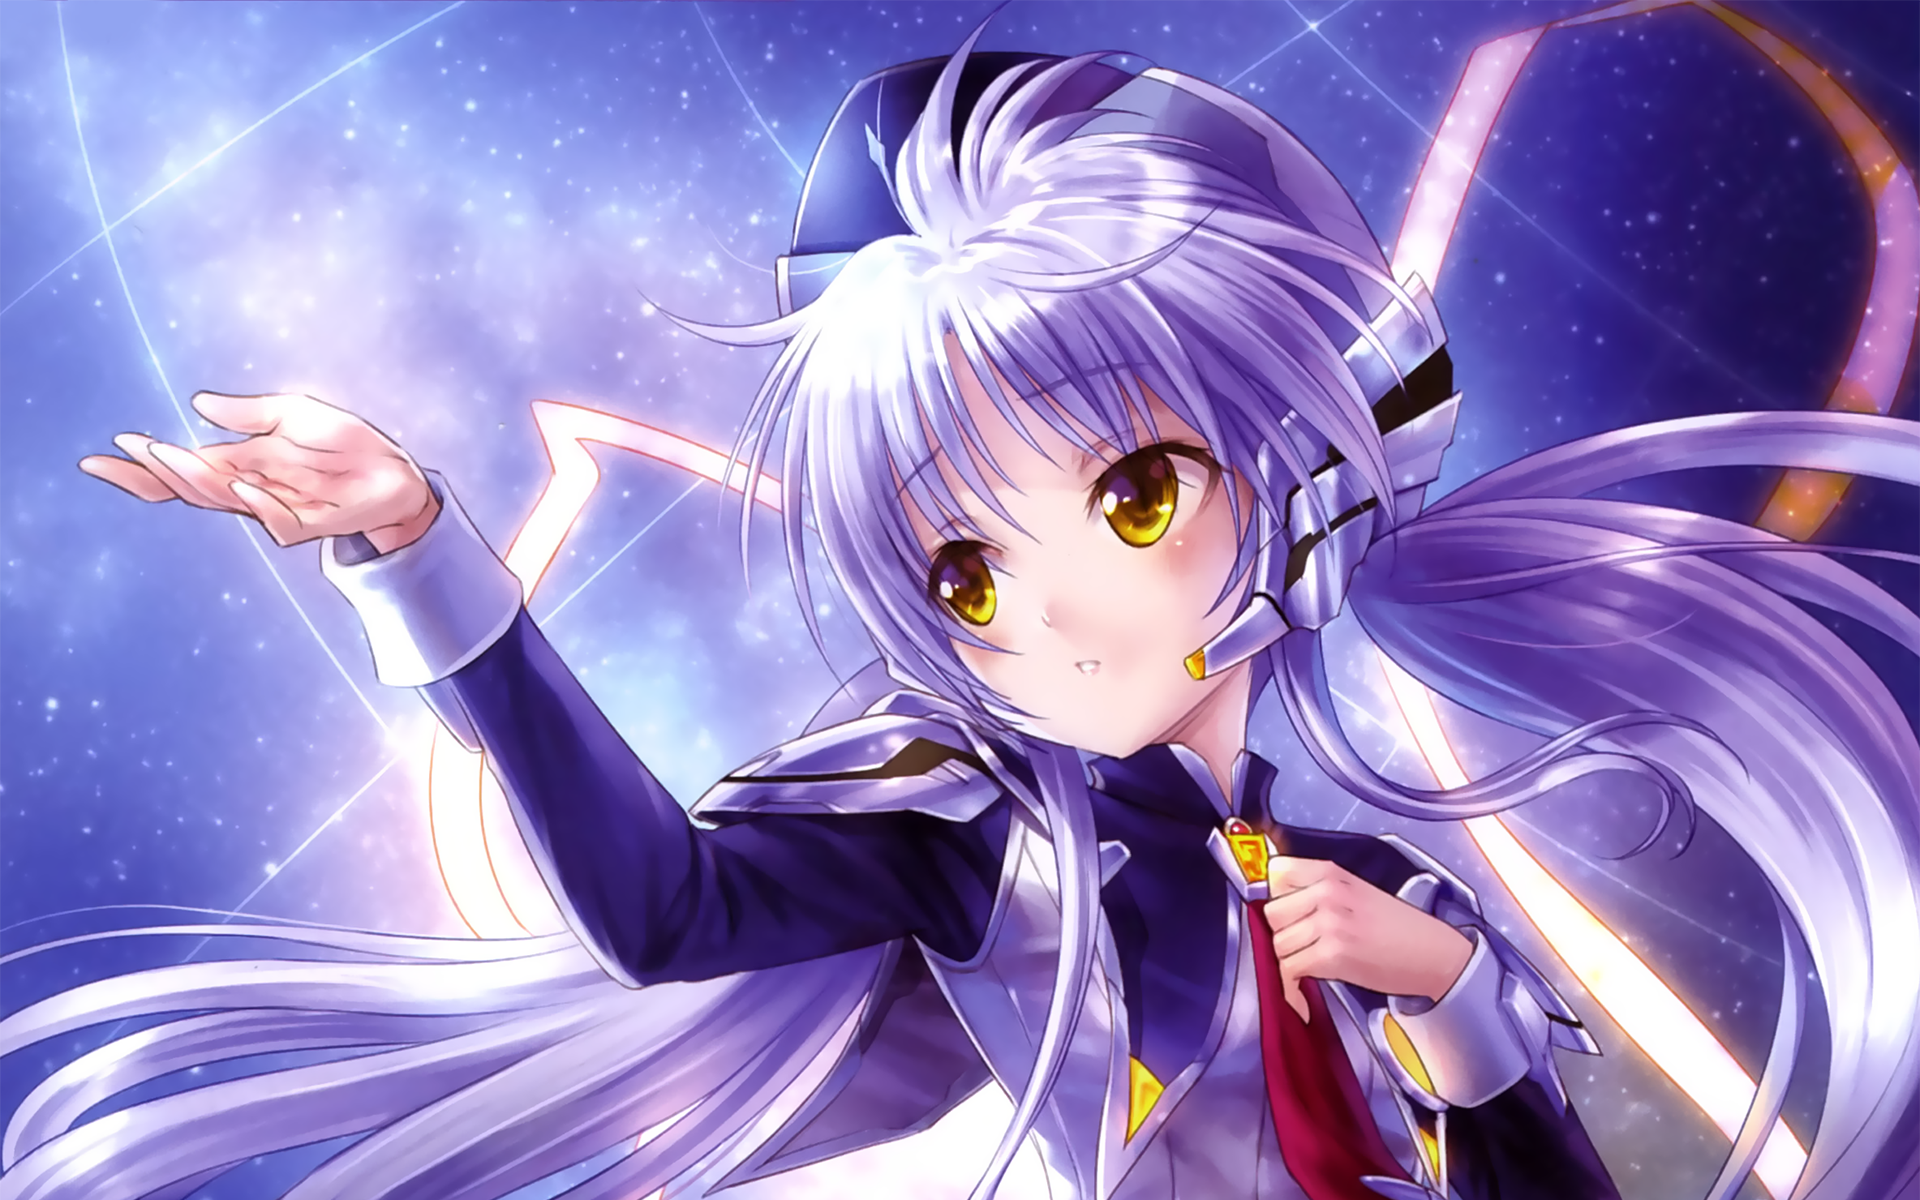 Anime Planetarian: The Reverie of a Little Planet HD Wallpaper | Background Image